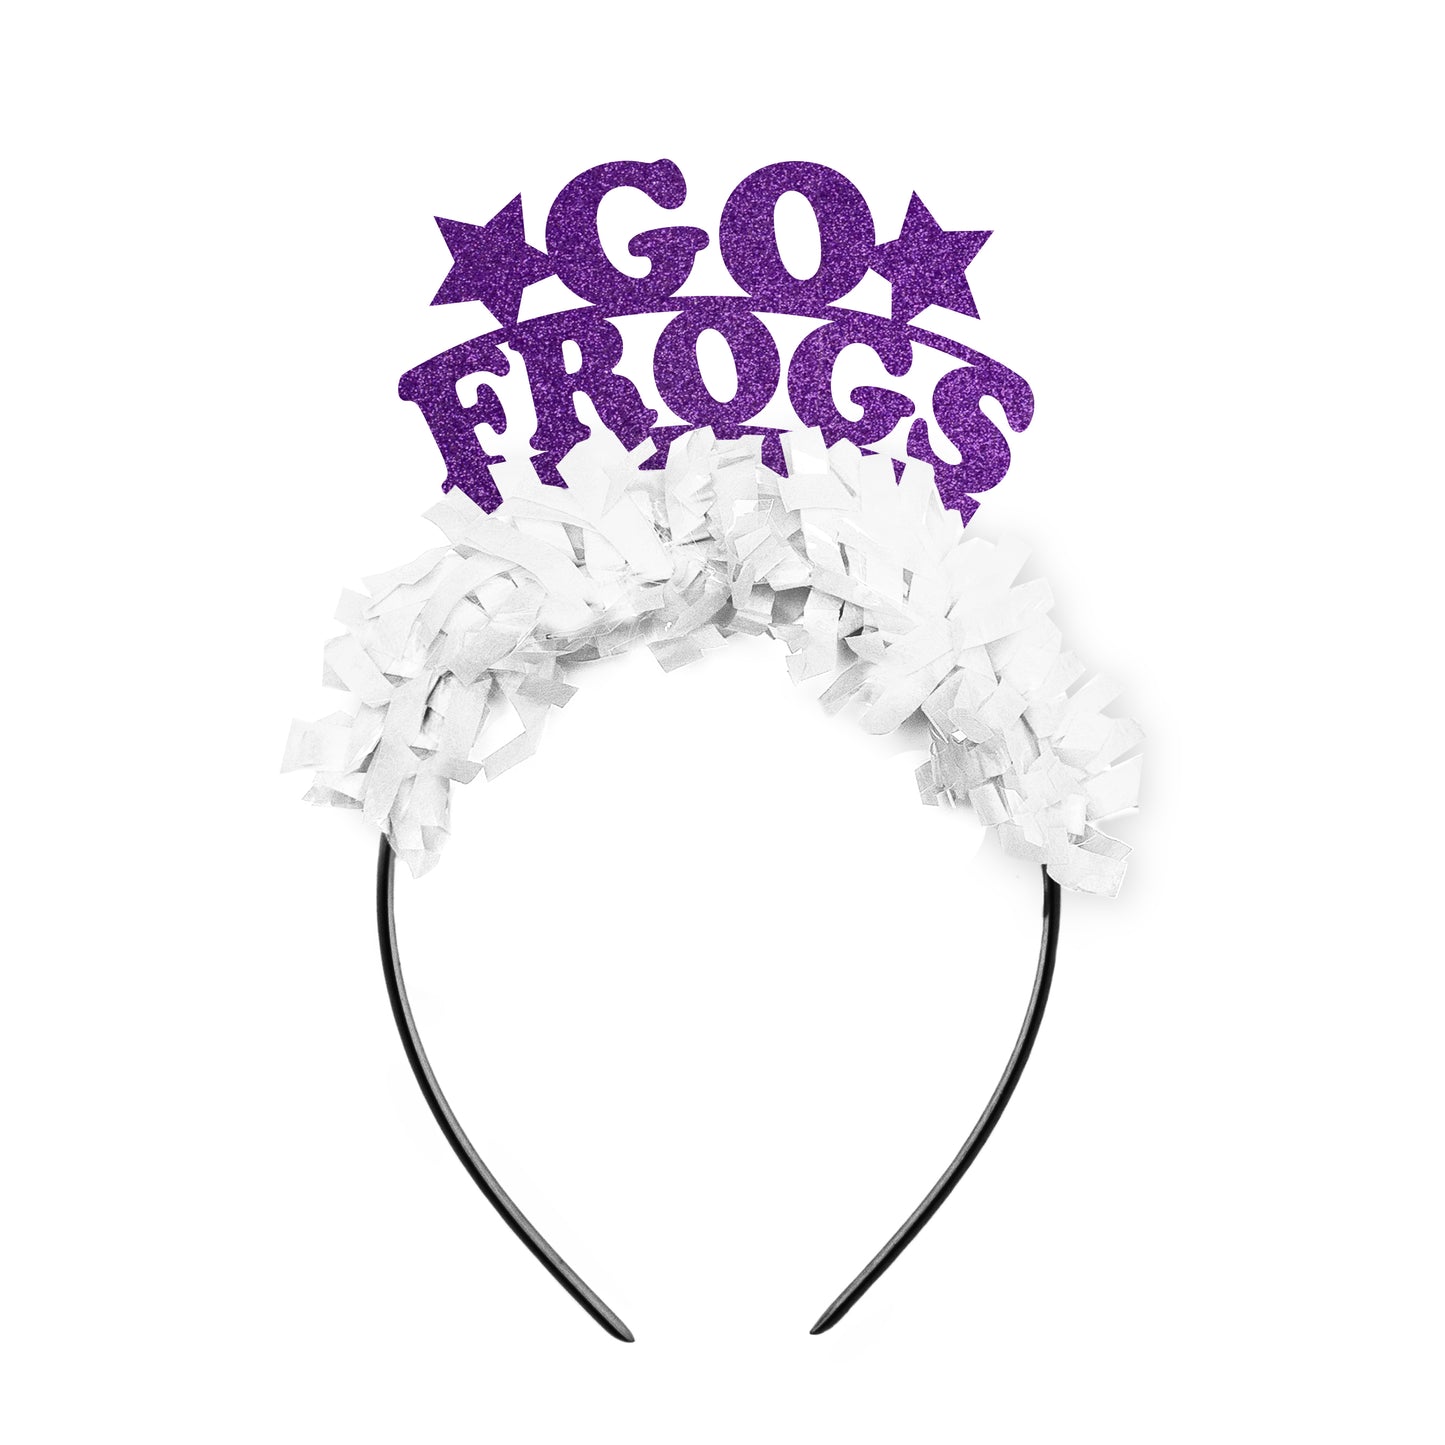 Texas Football Party Fangear for women - "Go Frogs" Game Day Headband. Purple and White Texas Game Day Party Headband that says Go Frogs